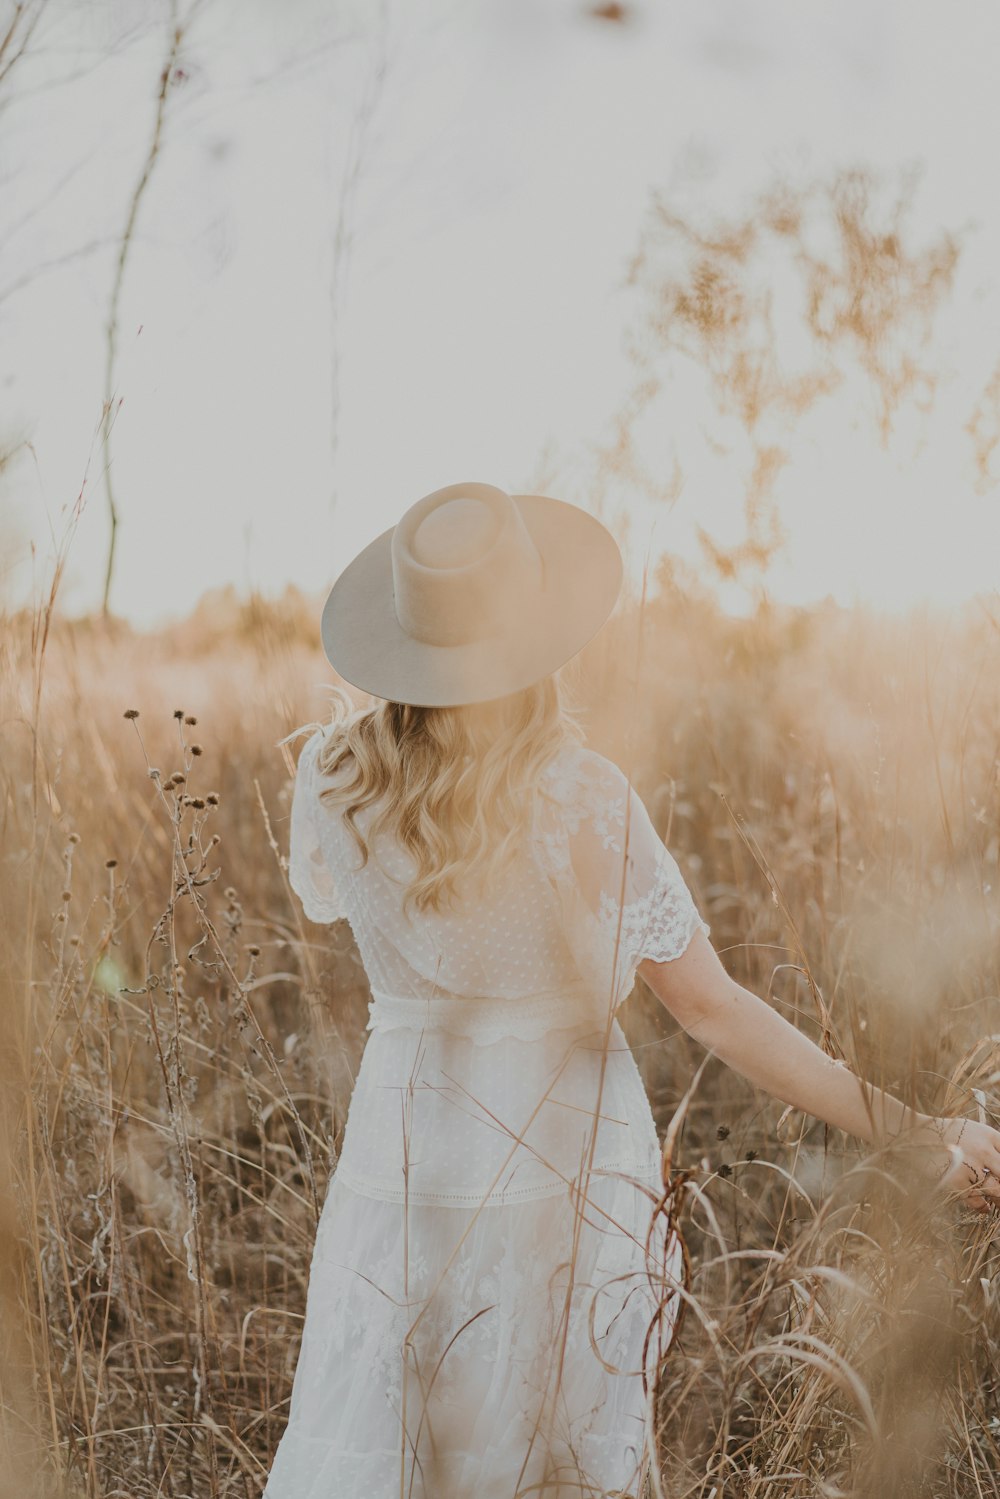 a woman in a white dress and hat walking through tall grass